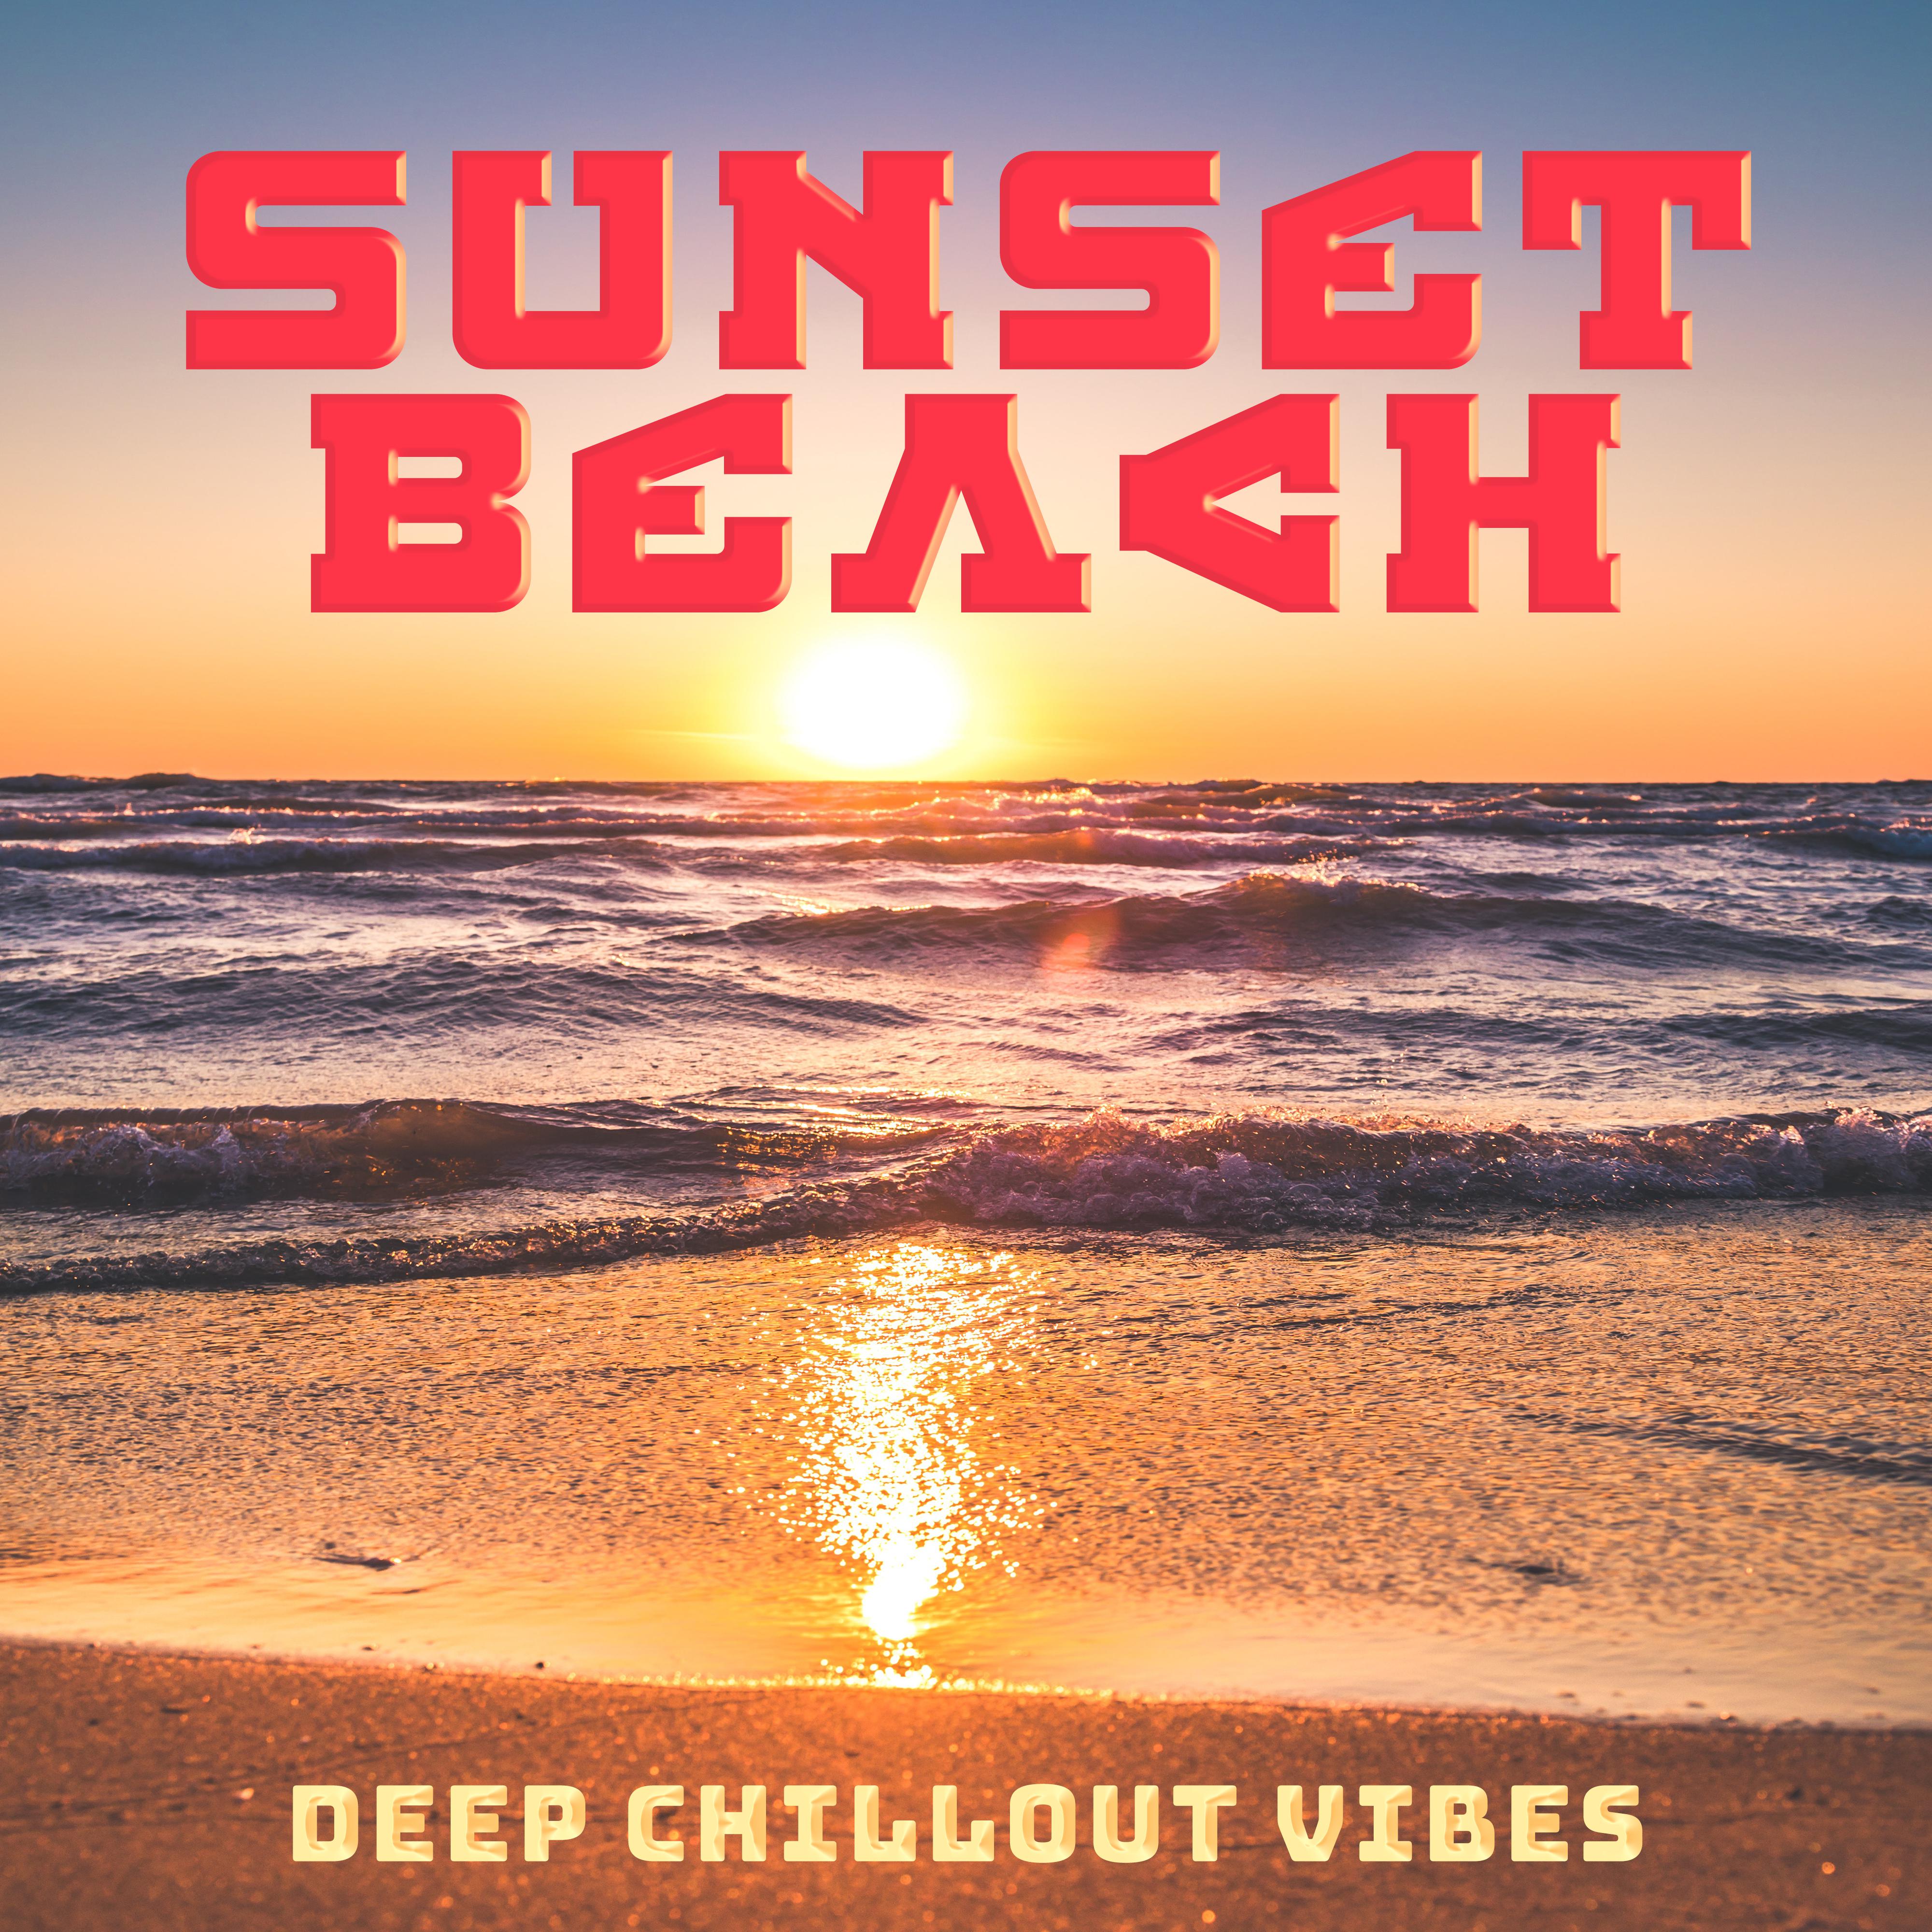 Sunset Beach Deep Chillout Vibes: 2019 Chill Out Ambient Melodies & Pumping Beats Compilation